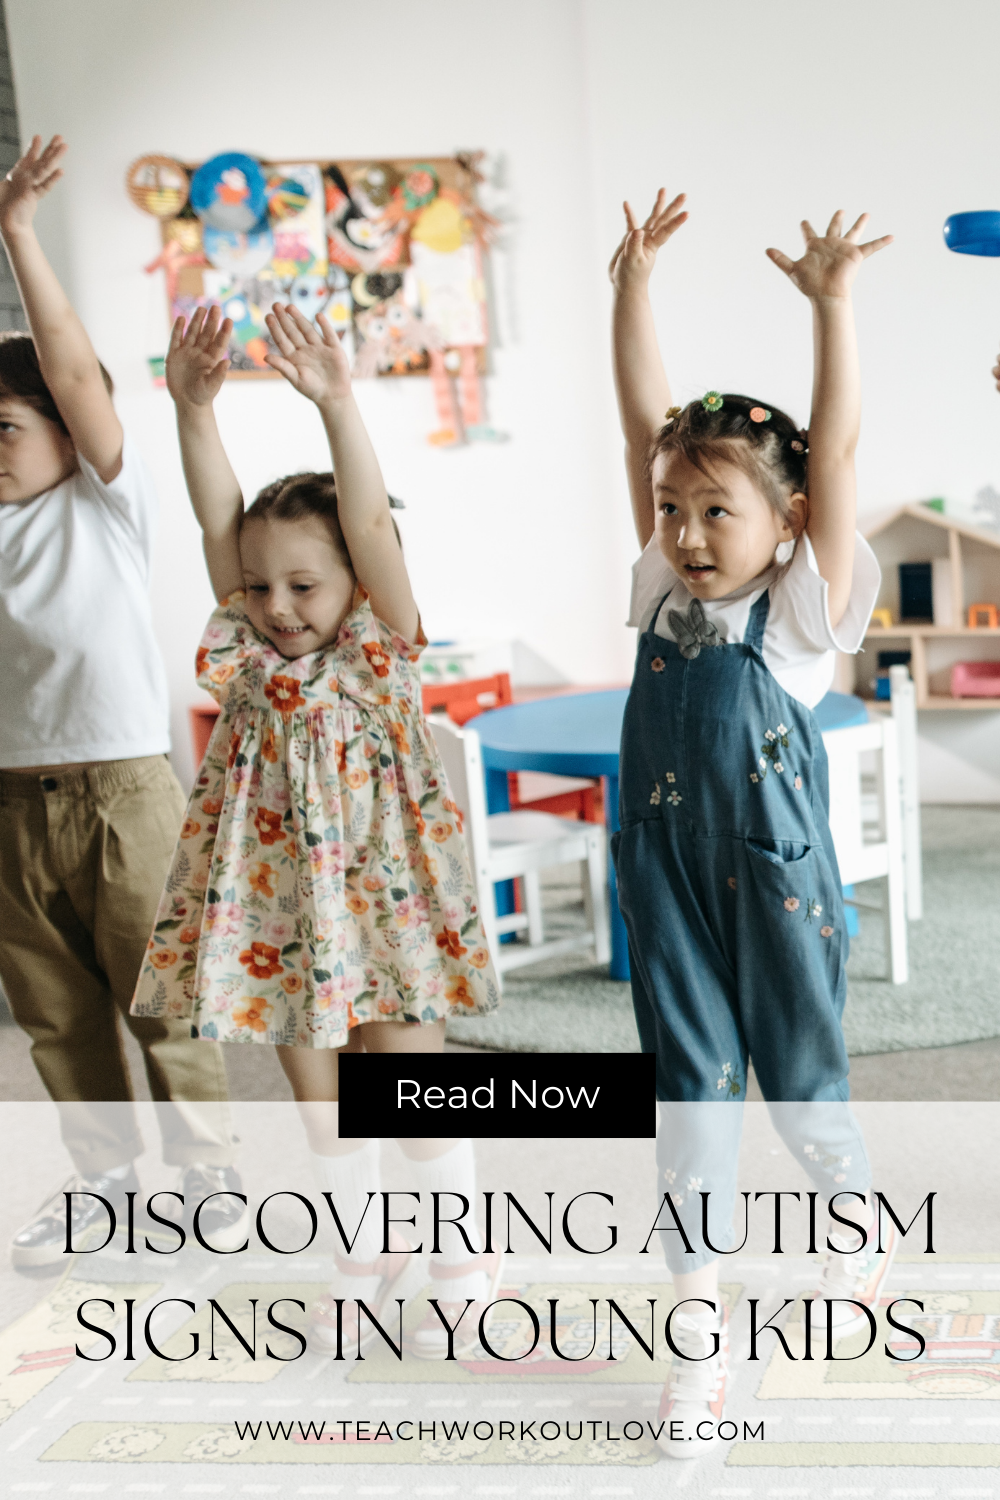 This post aims to shed light on ten key signs of autism in infants and young children and explain how autism testing can help answer concerns.